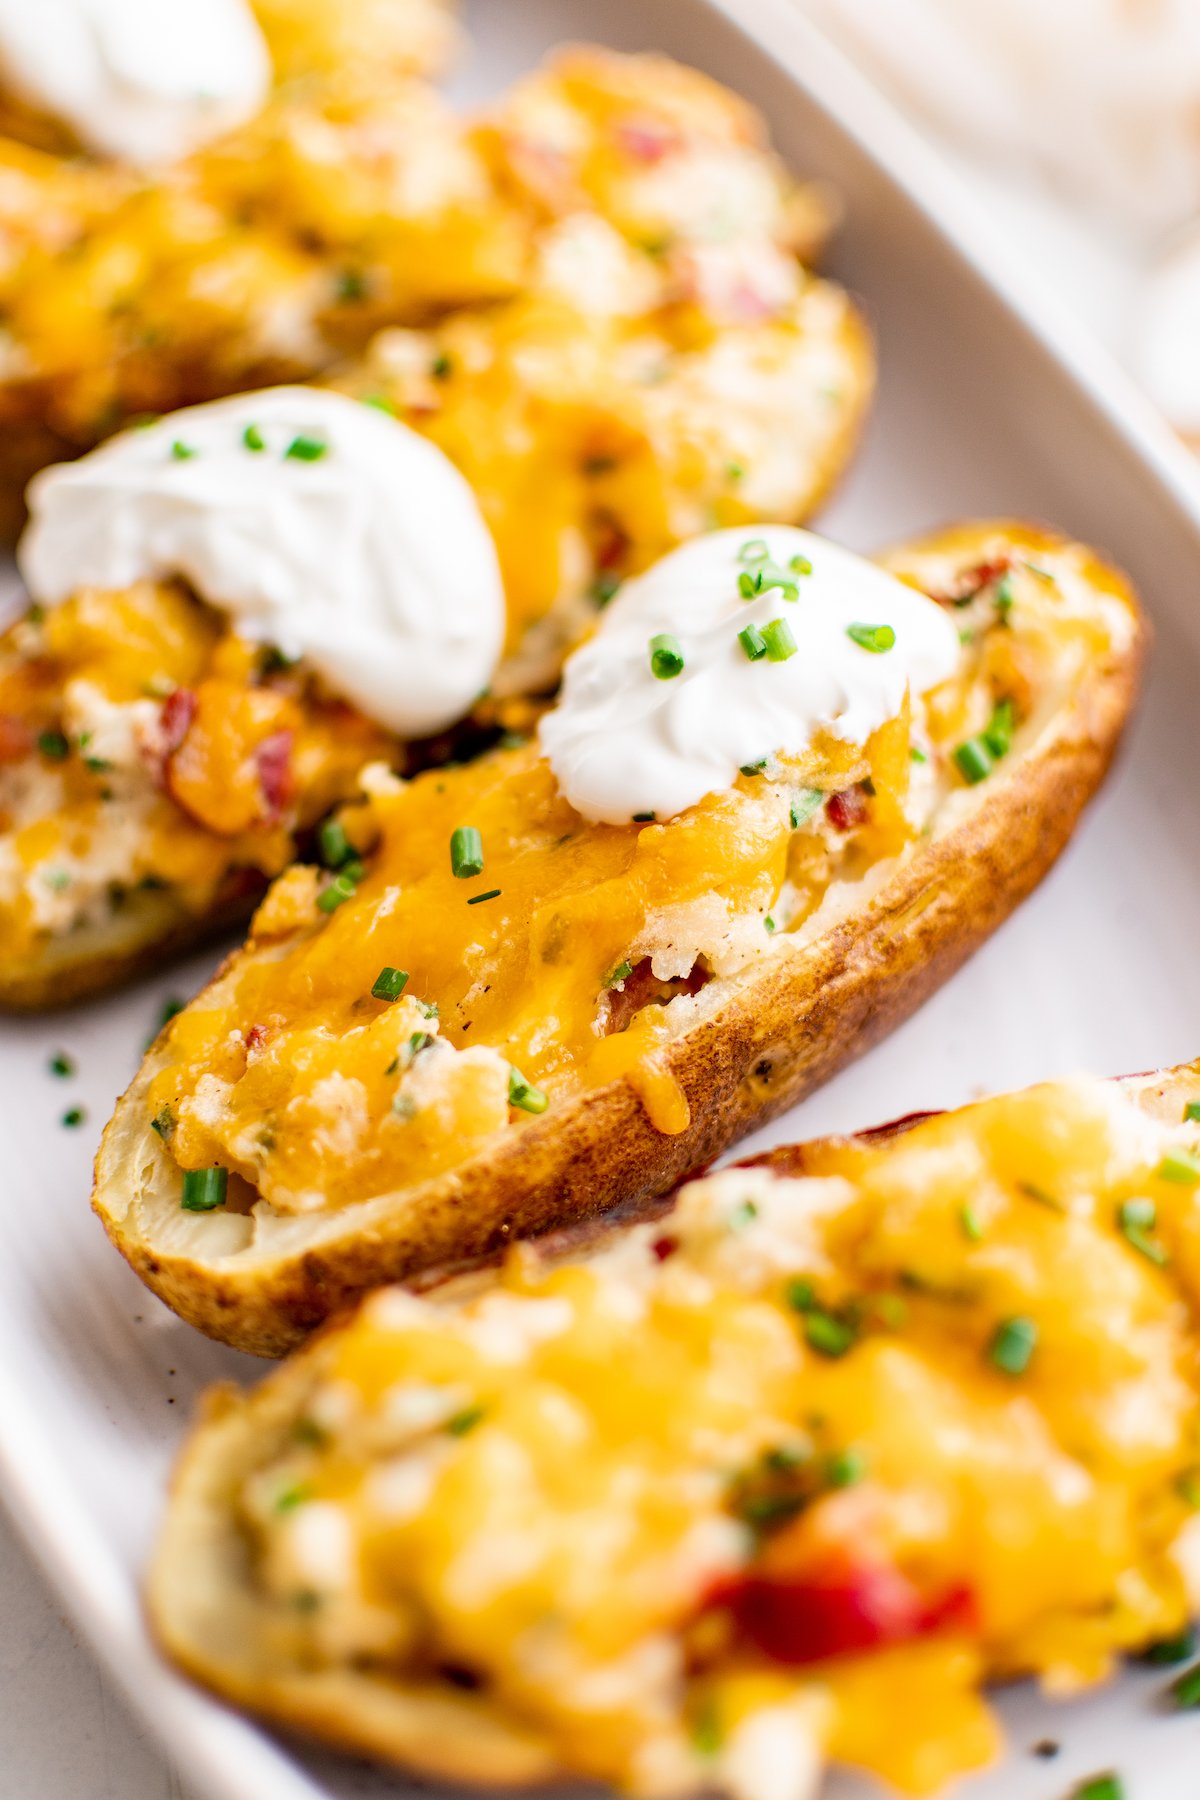 Twice baked potatoes topped with sour cream.